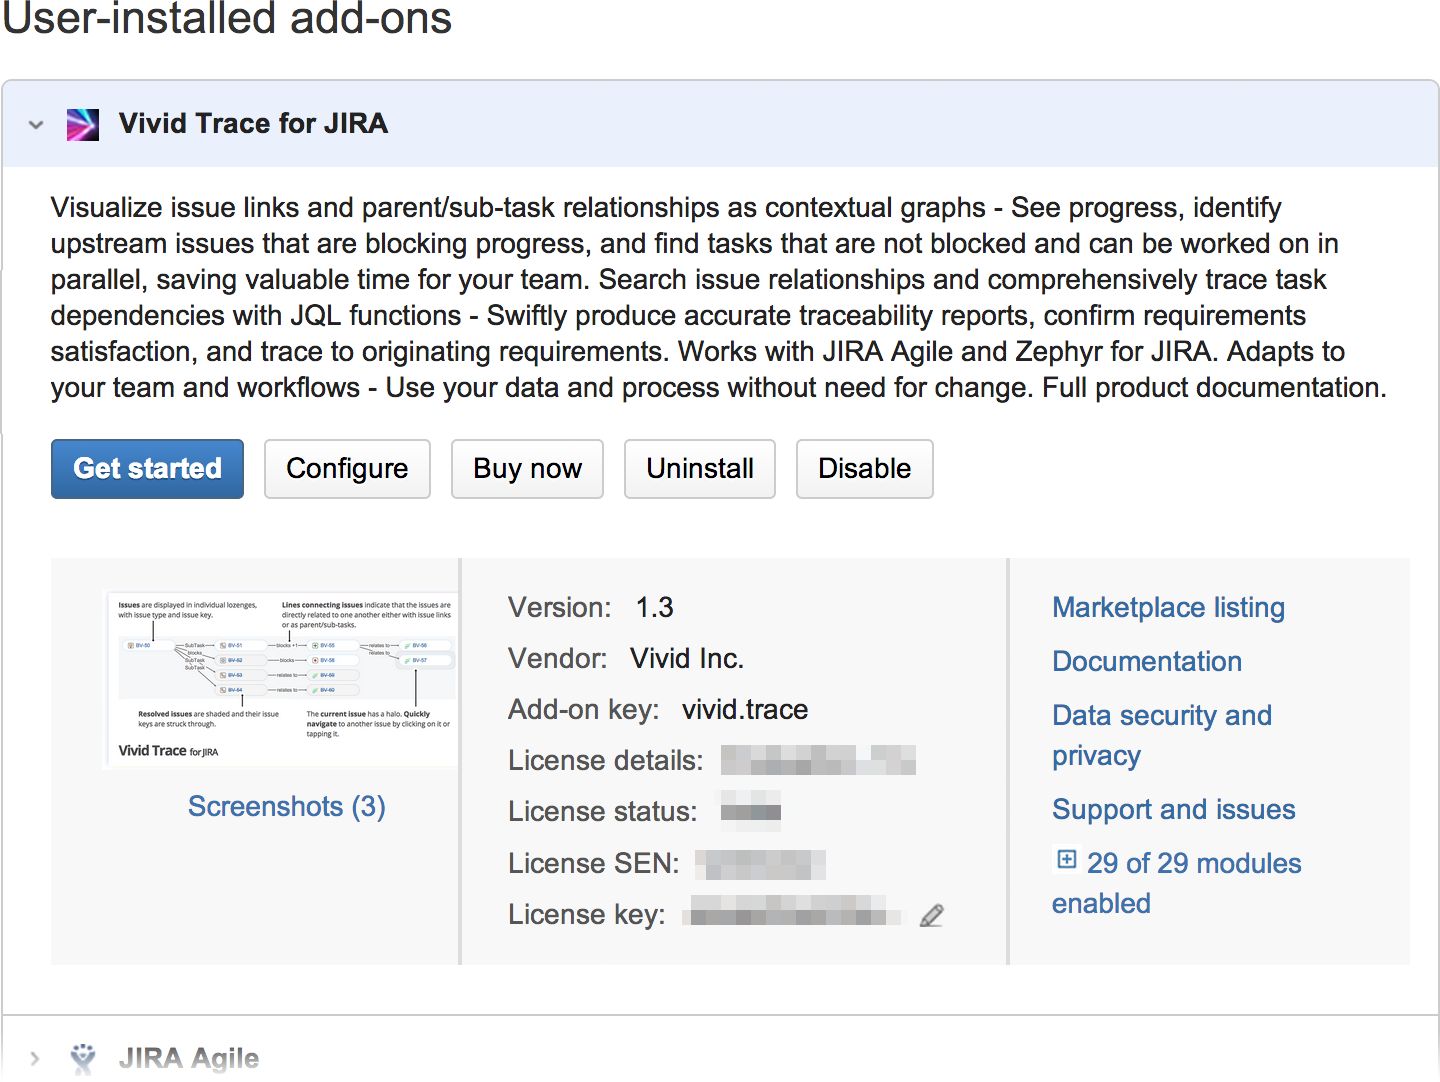 Figure: Managing the Vivid Trace add-on in JIRA